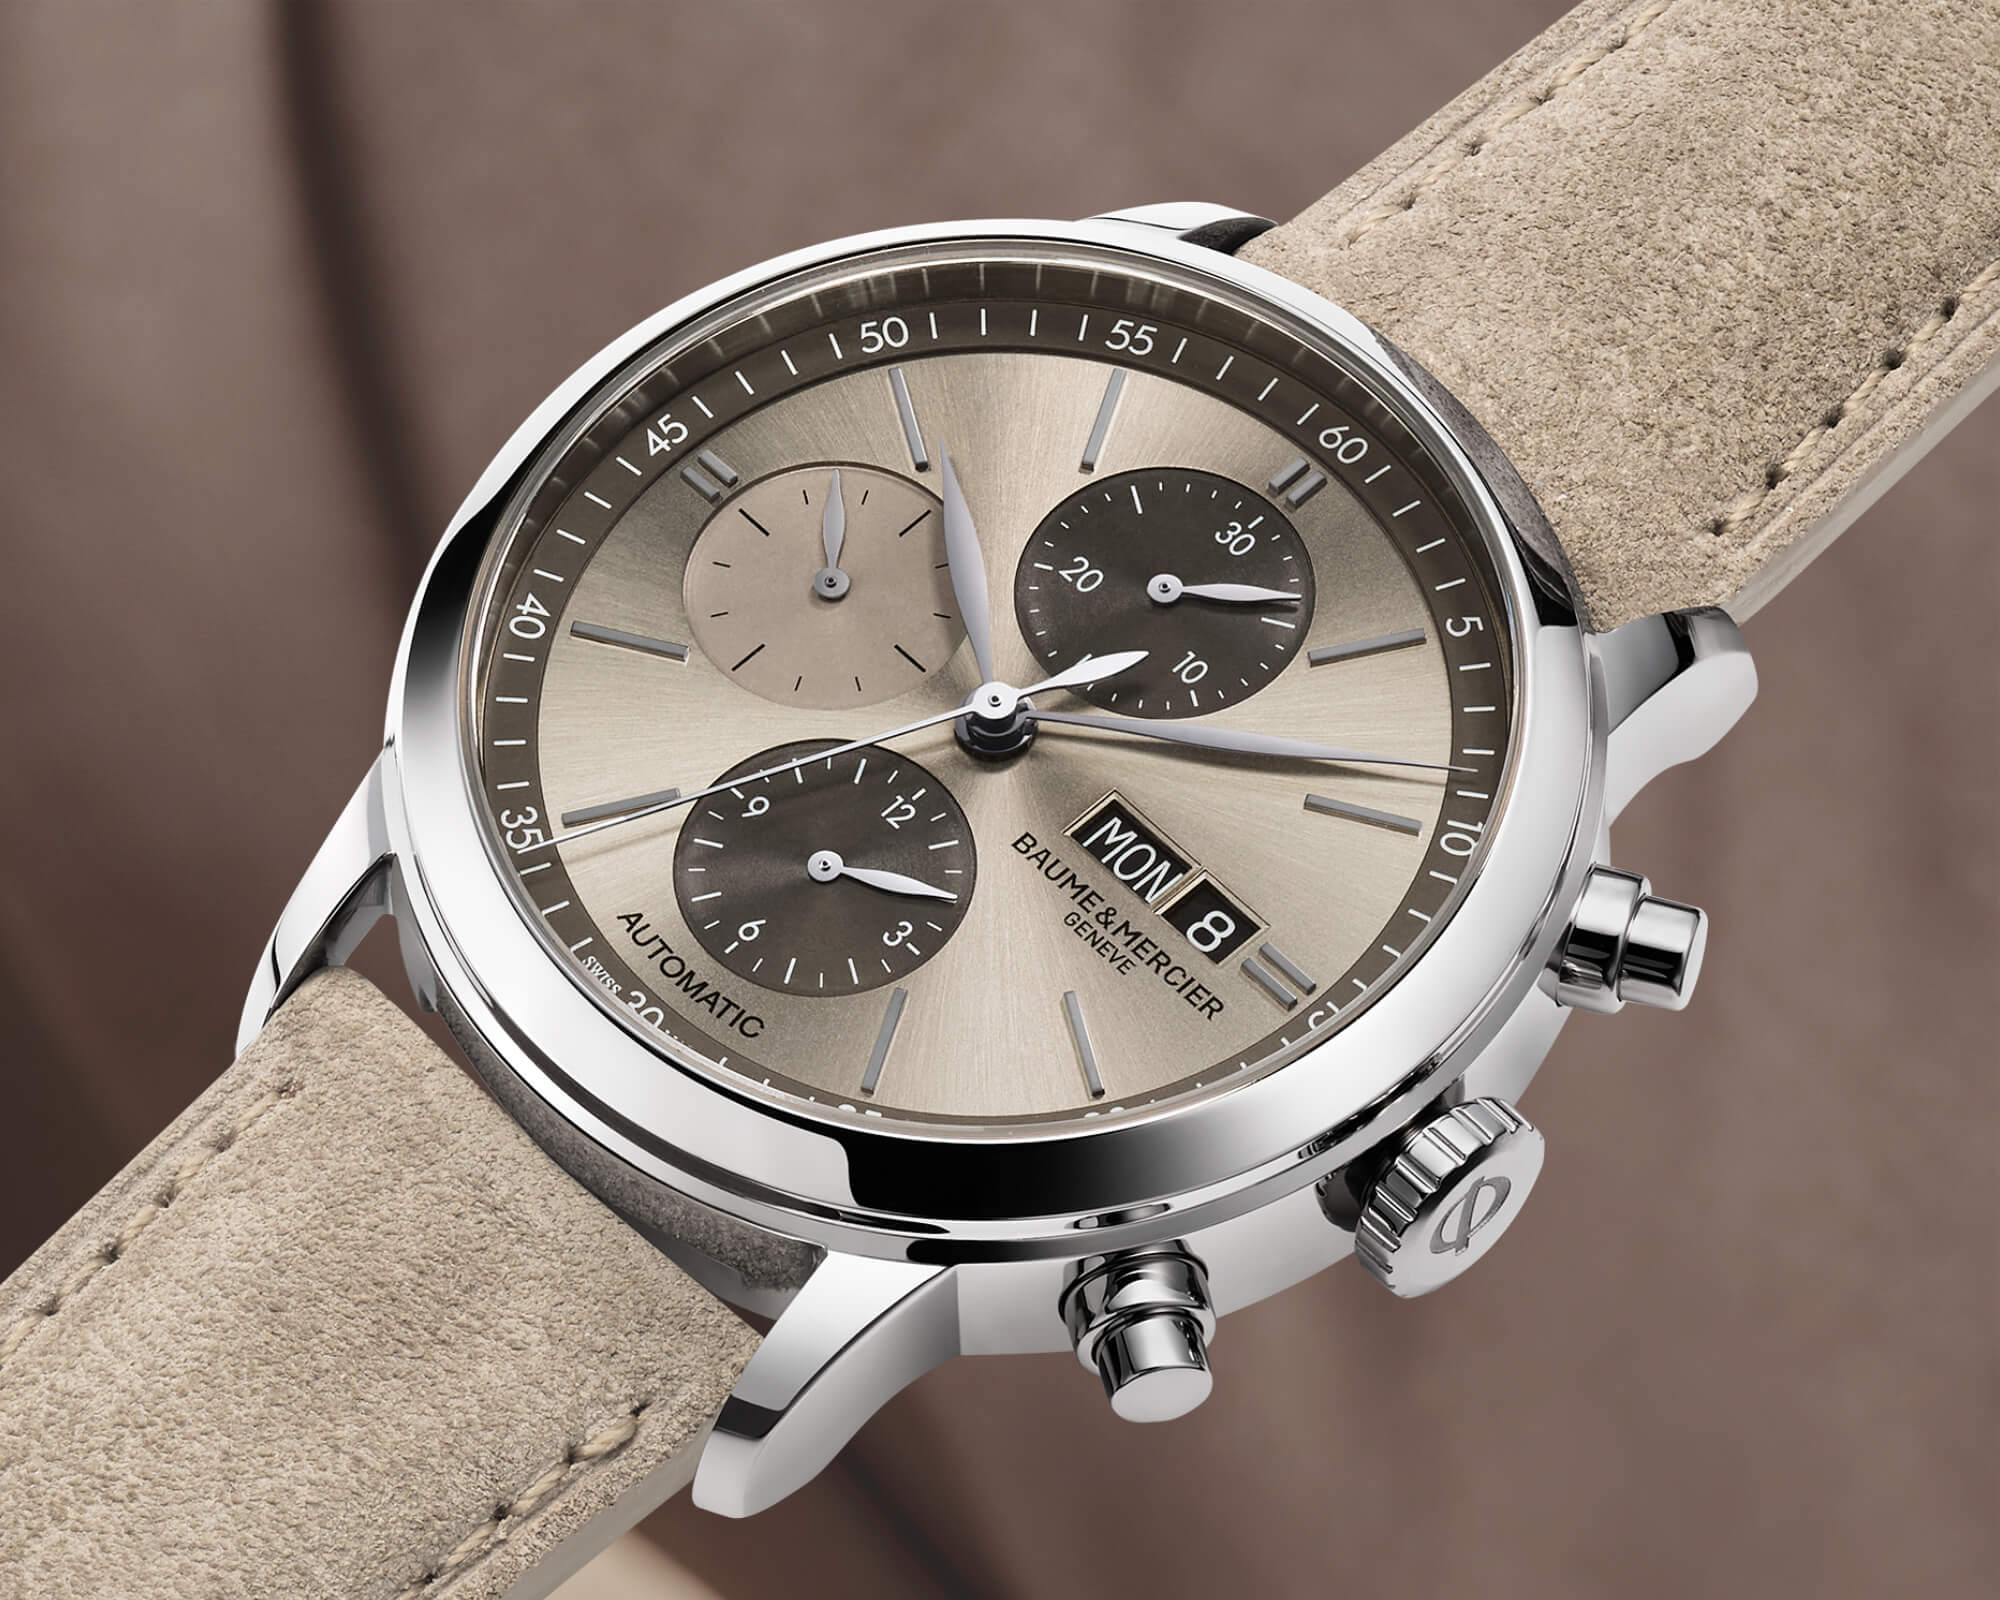 New Release: Baume & Mercier Classima Chronograph Watches | aBlogtoWatch